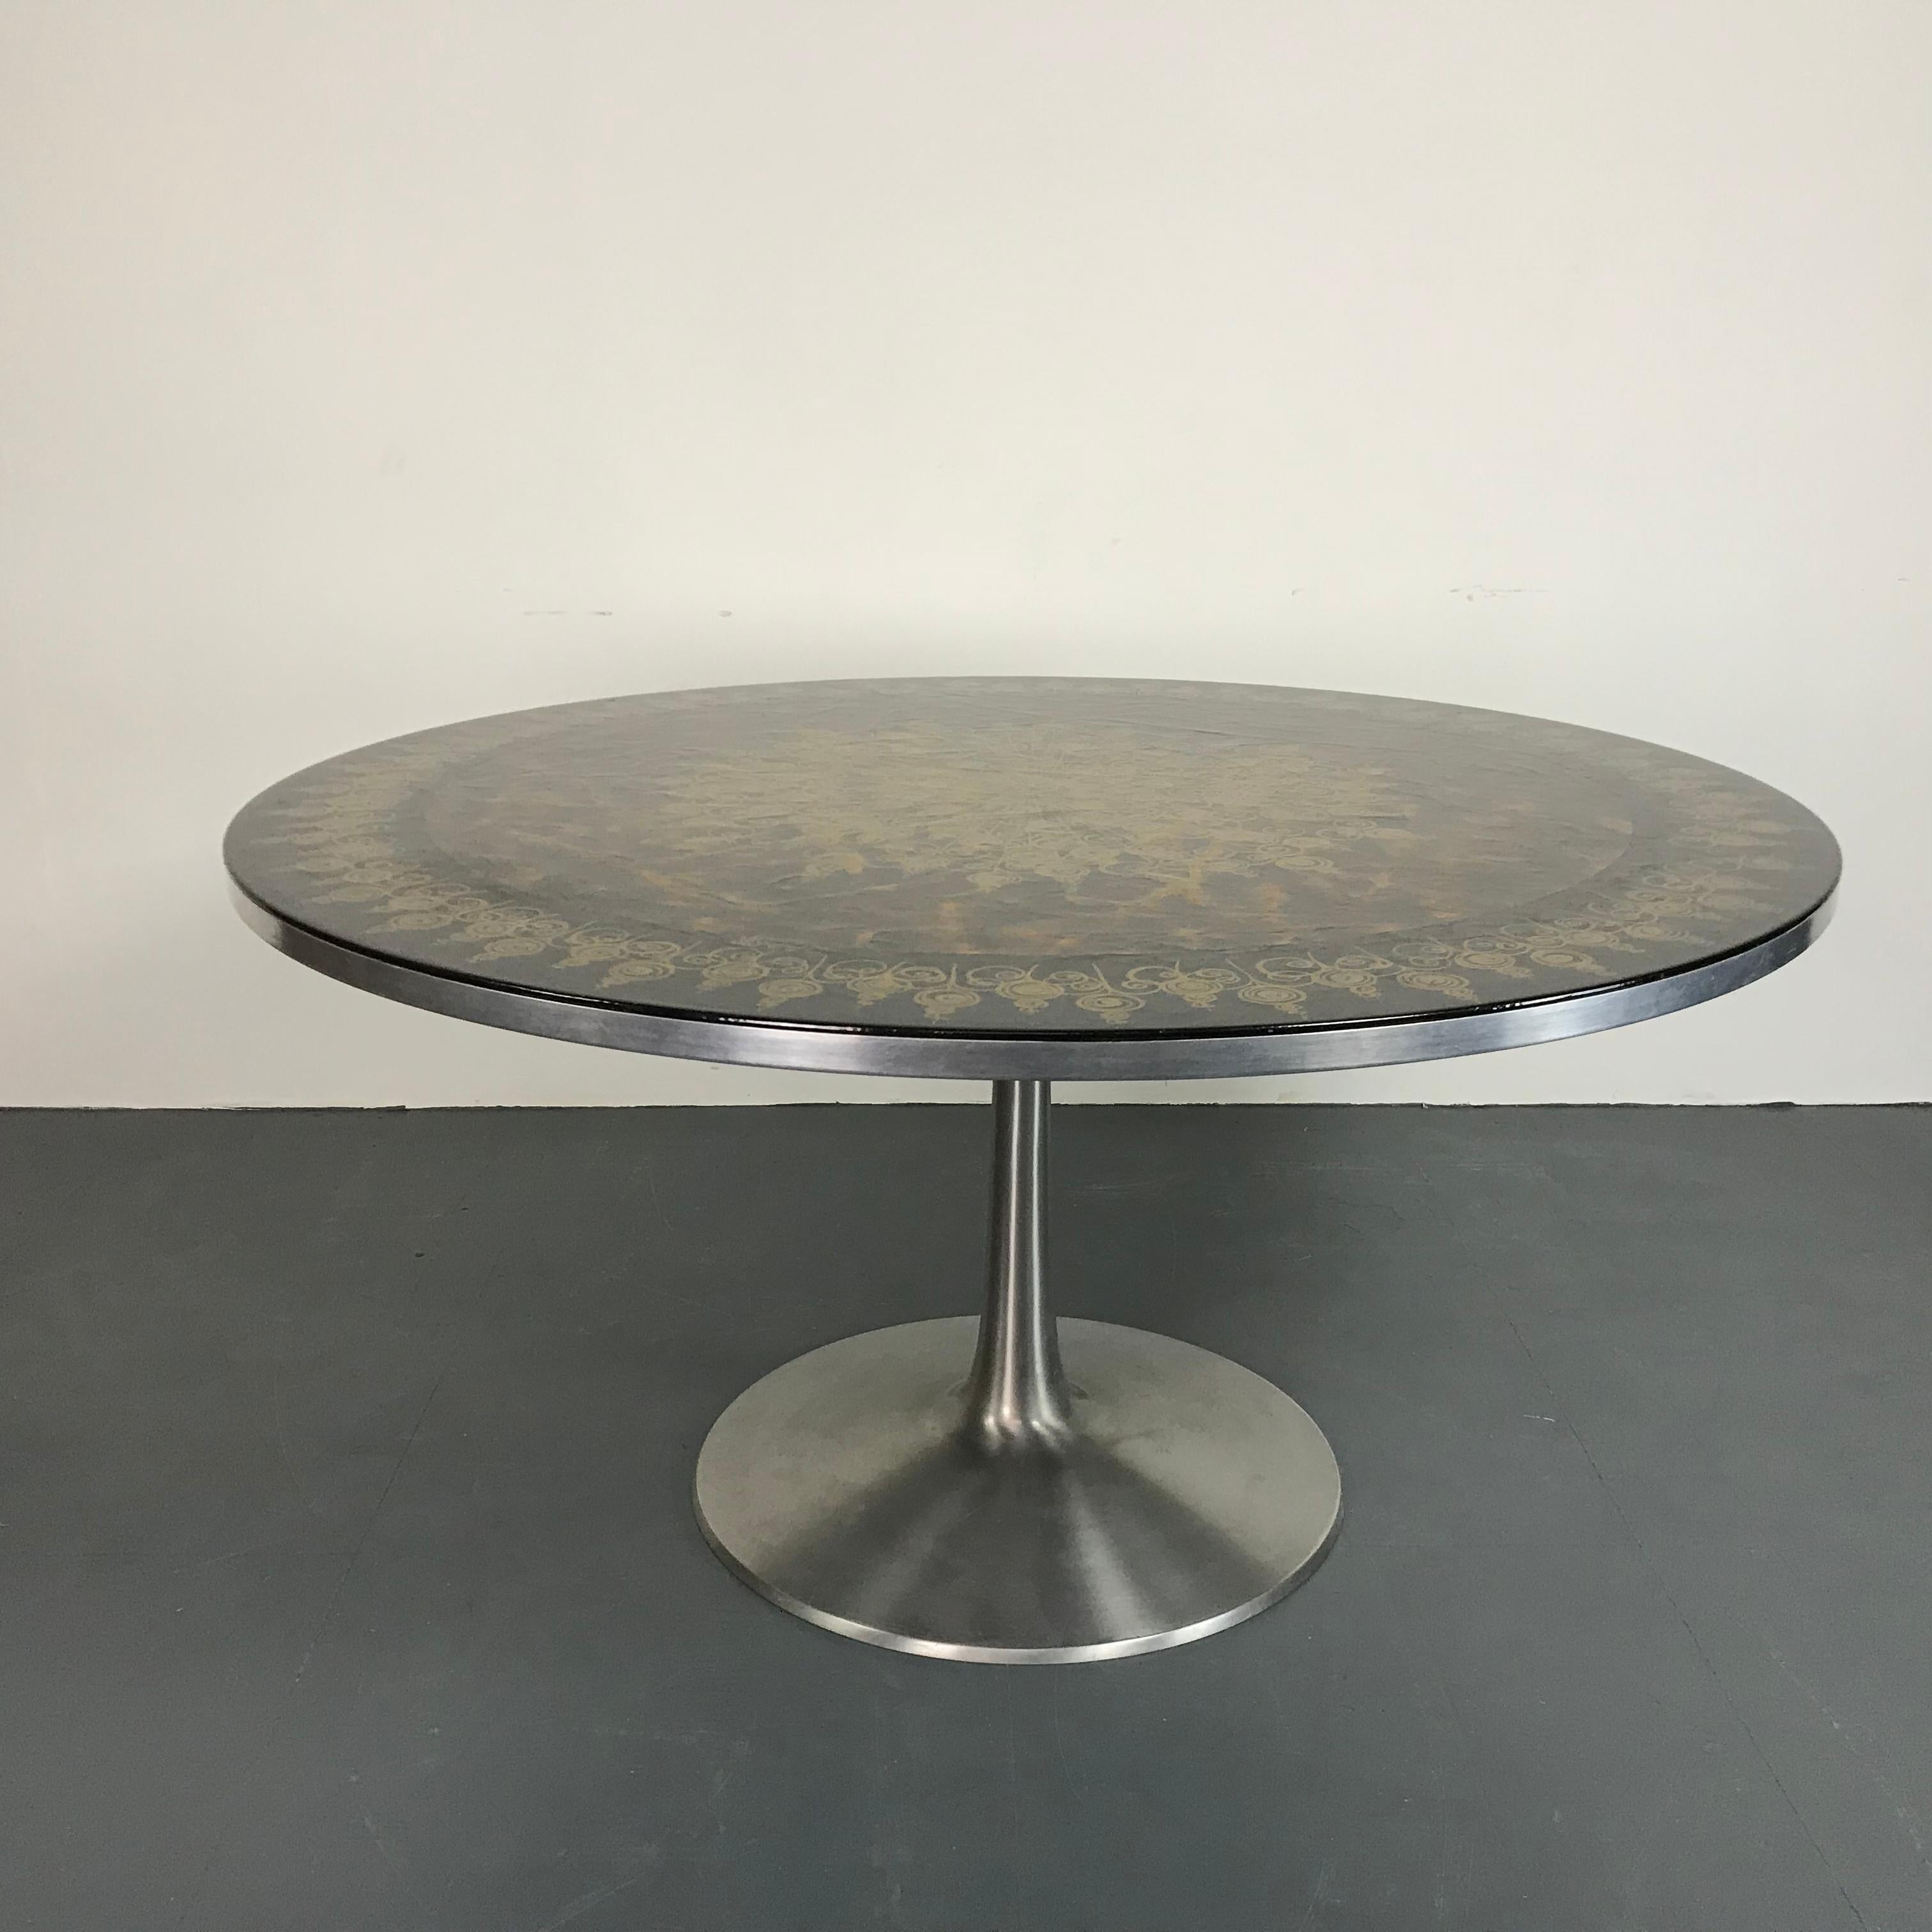 Beautiful midcentury tulip style dining table, designed by Poul Cadovius and decorated by Susanne Fjeldsøe. Manufactured by Cado in the 1960s.

In good vintage condition. 

Approximate dimensions: 

Height 70cm

Diameter 138cm.

A